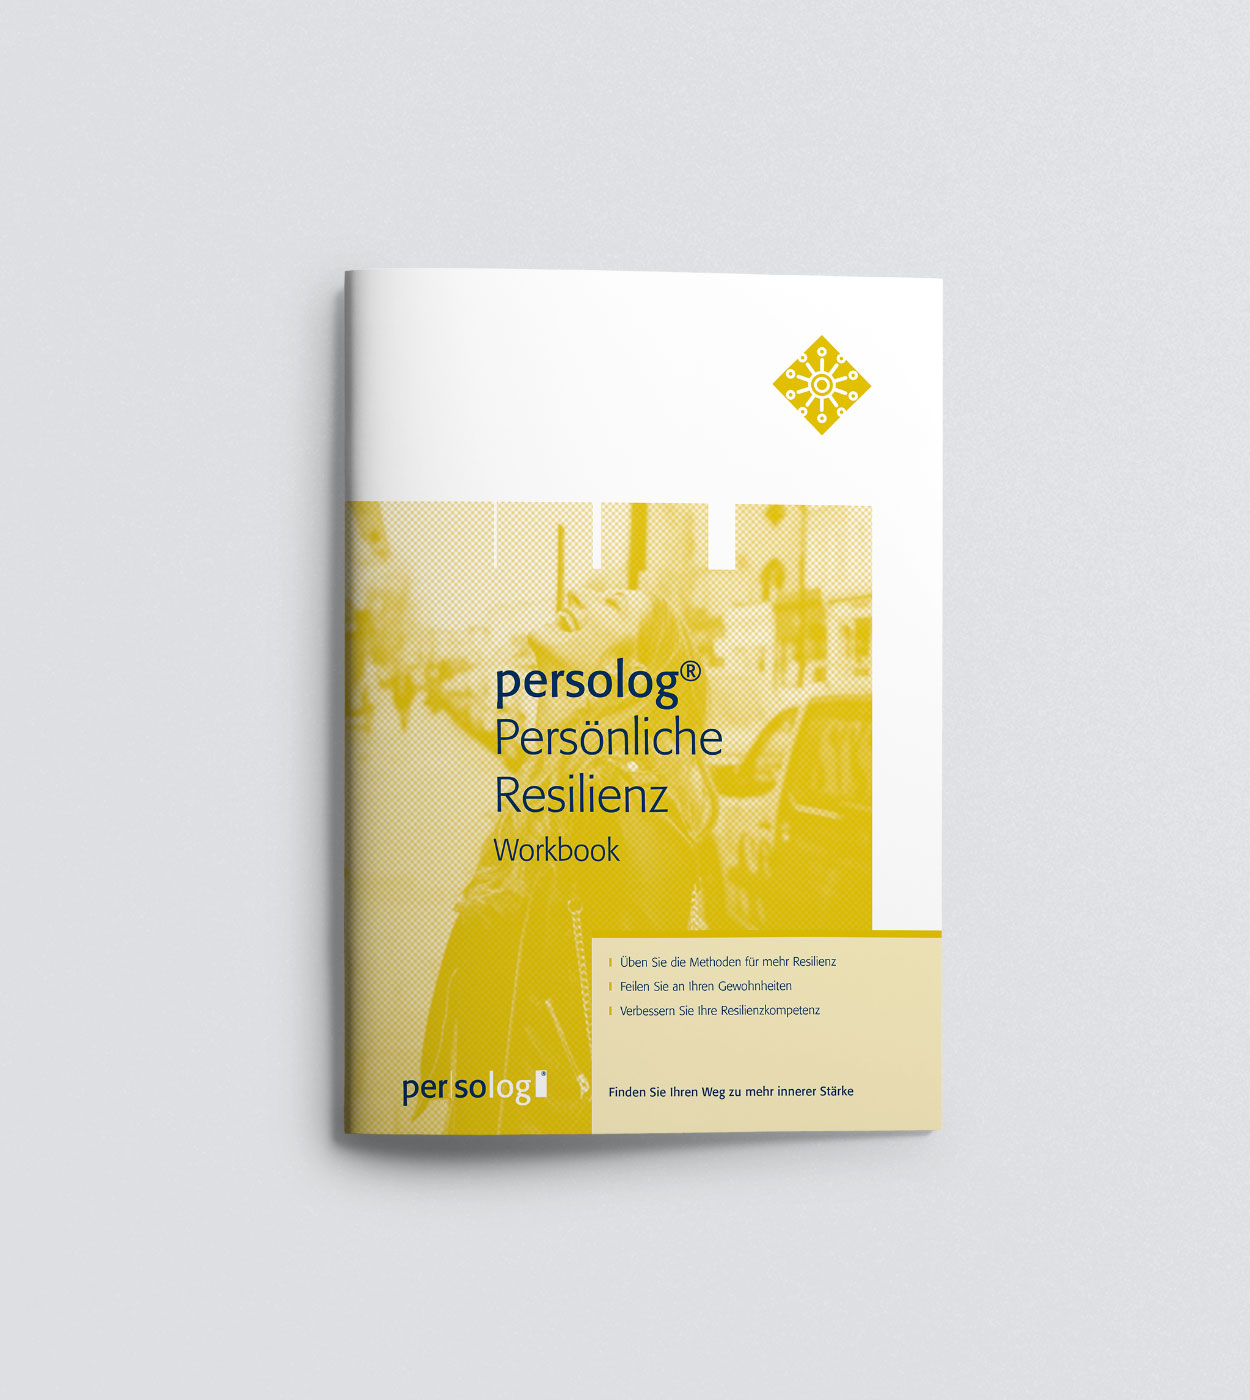 persolog® Personal Resilience Workbook